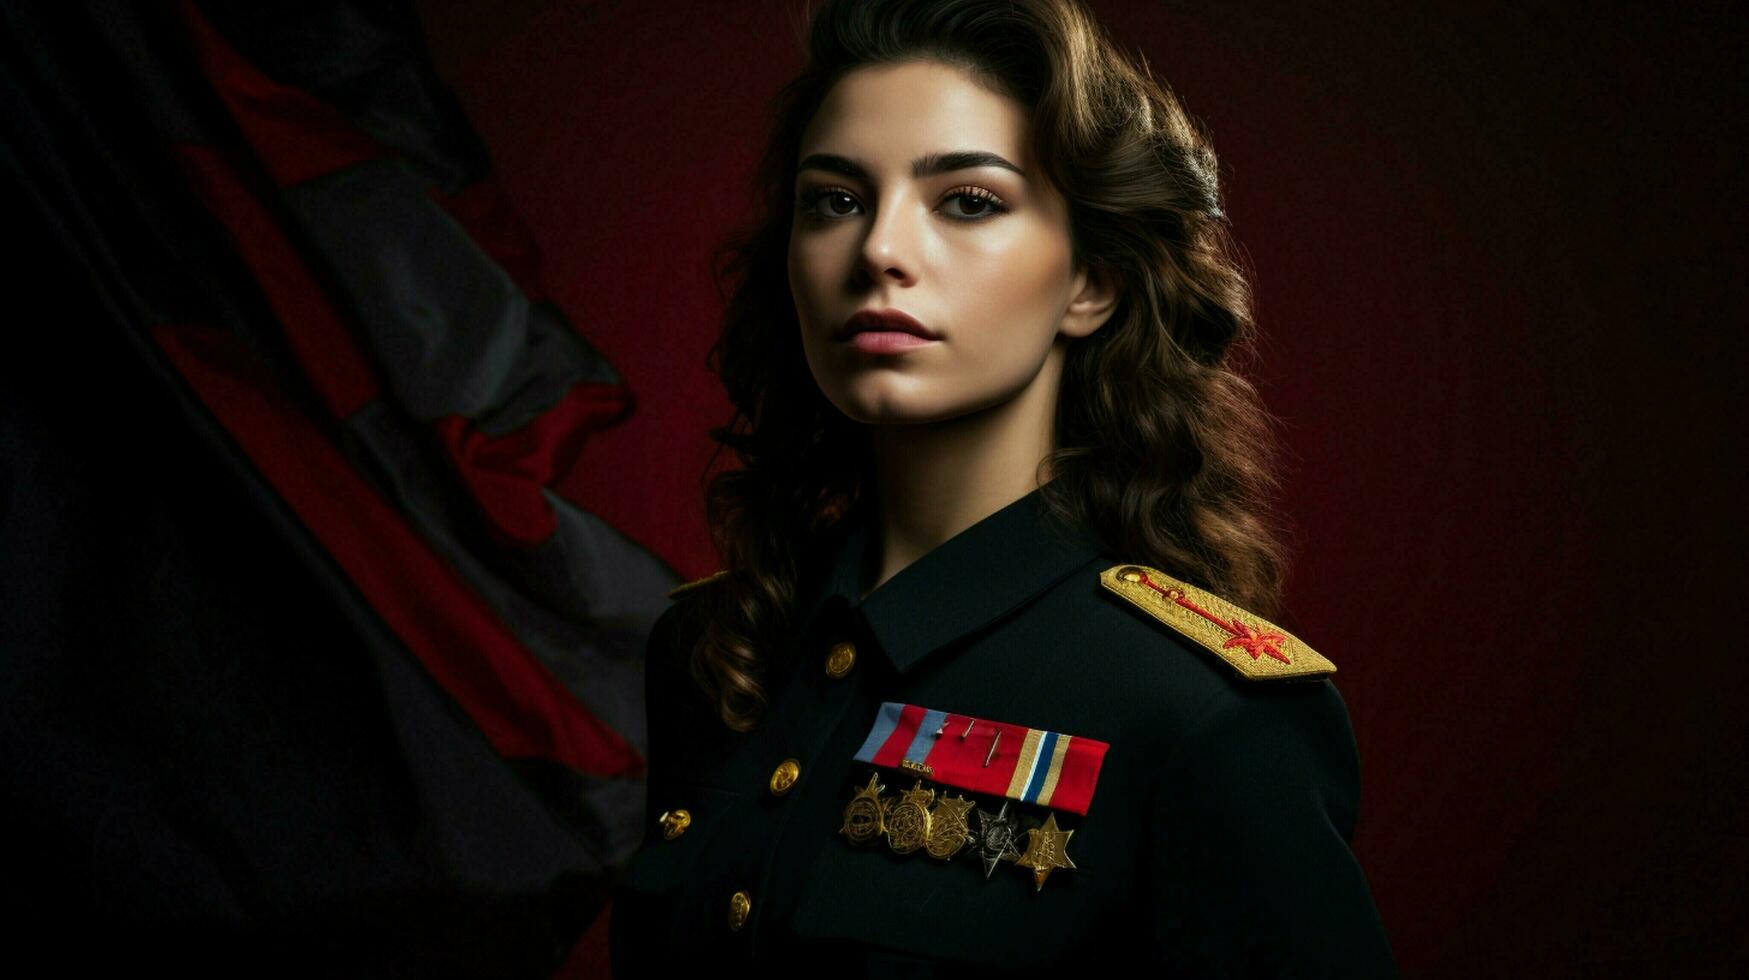 young woman in military uniform shows patriotism photo